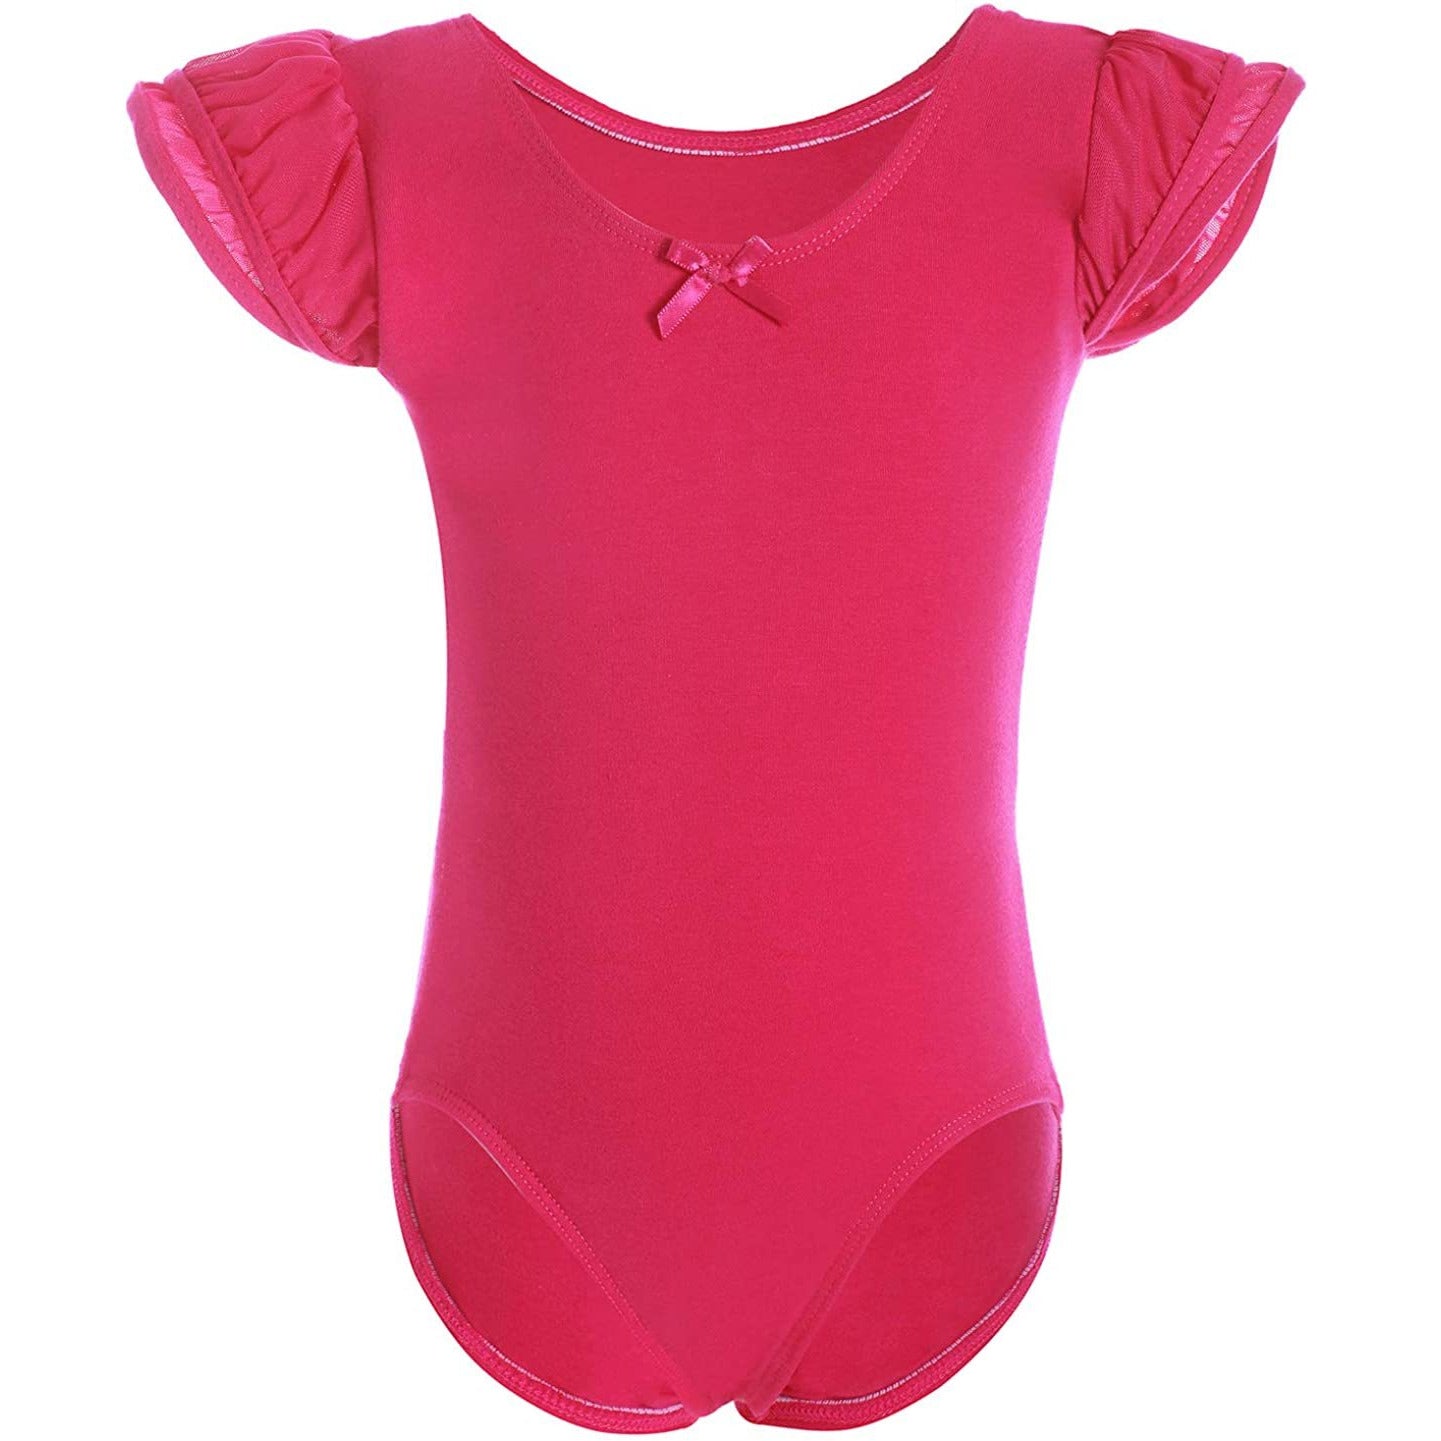 Dancina Girls Ballet Leotard with Flutter Sleeve and Full Front Lining in Hot Pink